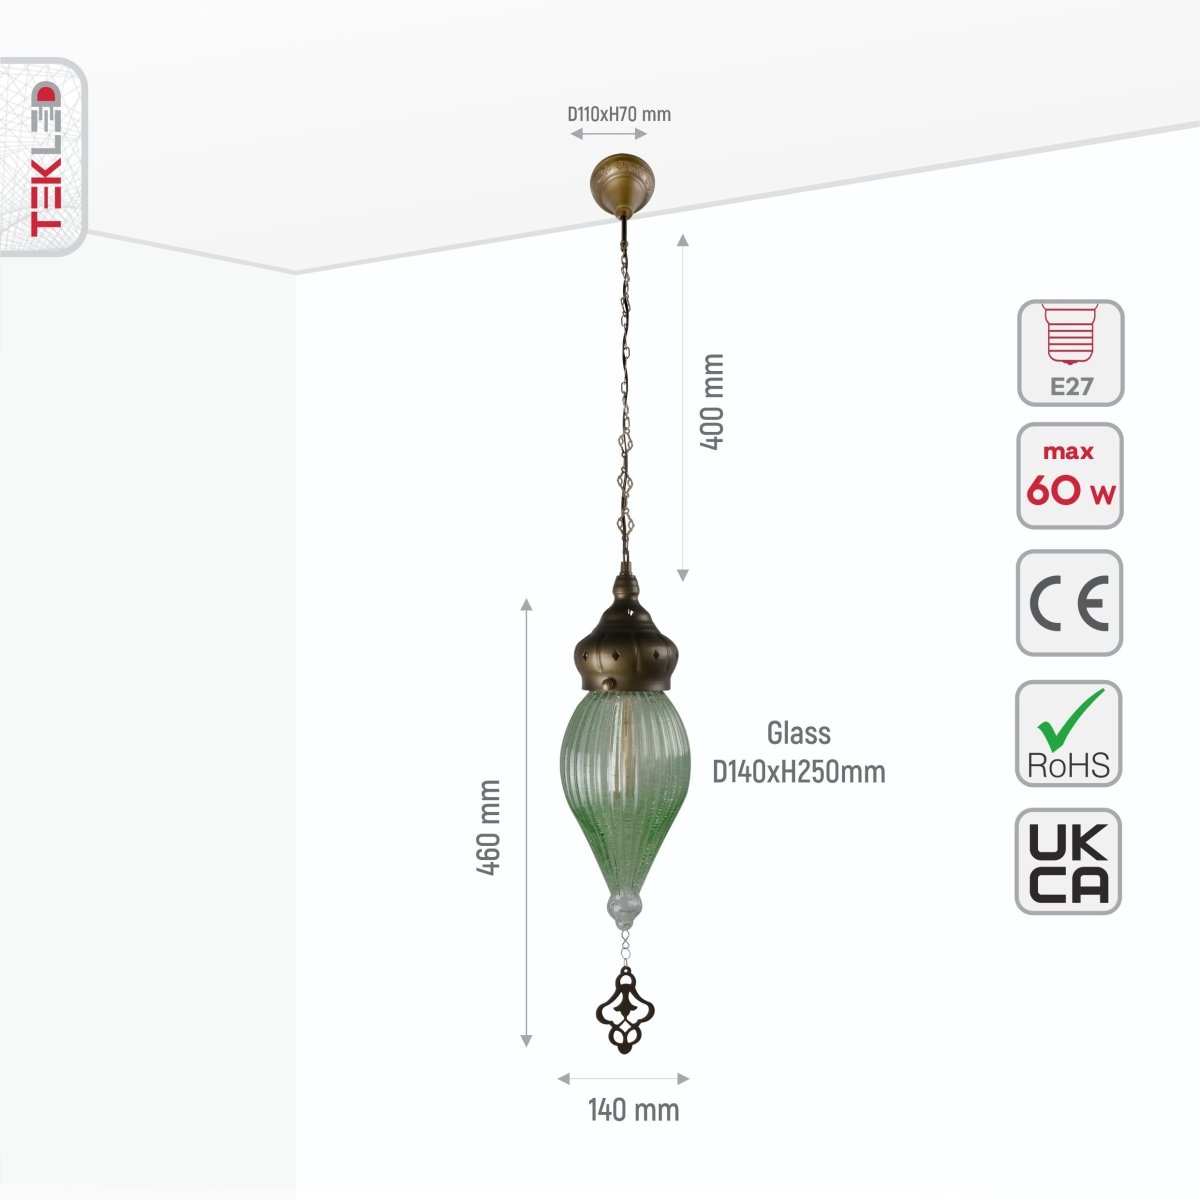 Size and specs of Moroccan Style Antique Brass and Green Glass Pendant Light E27 | TEKLED 158-195580